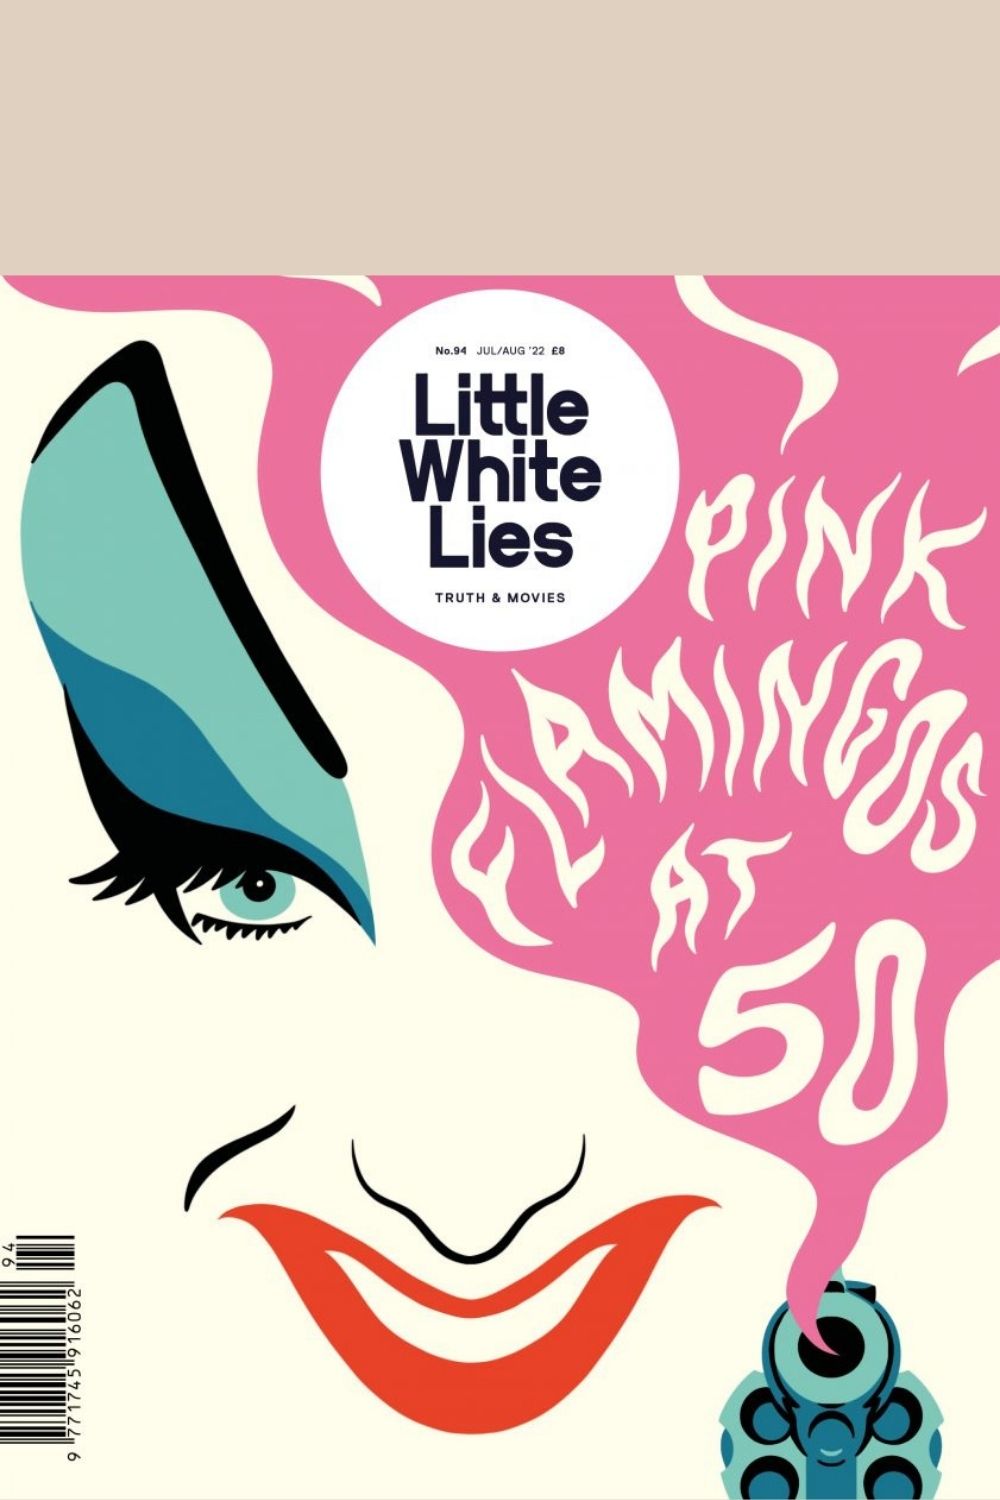 Front cover of Little White Lies magazine issue 95